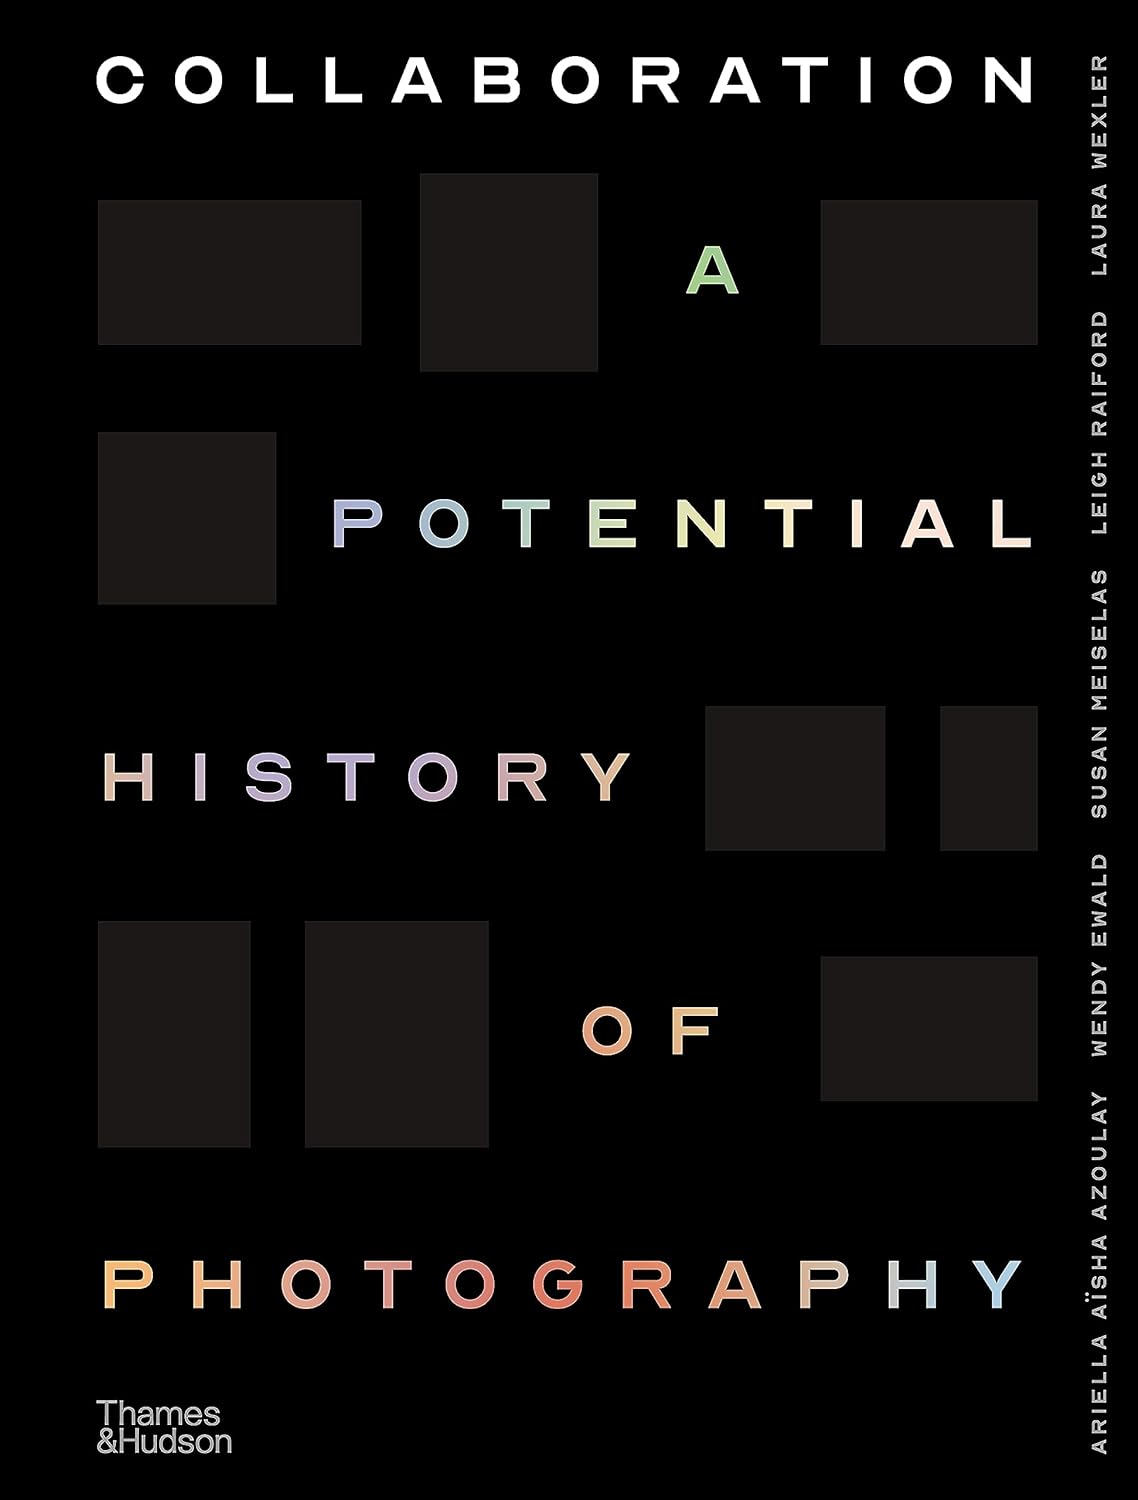 Collaboration. A Potential History of Photography politics